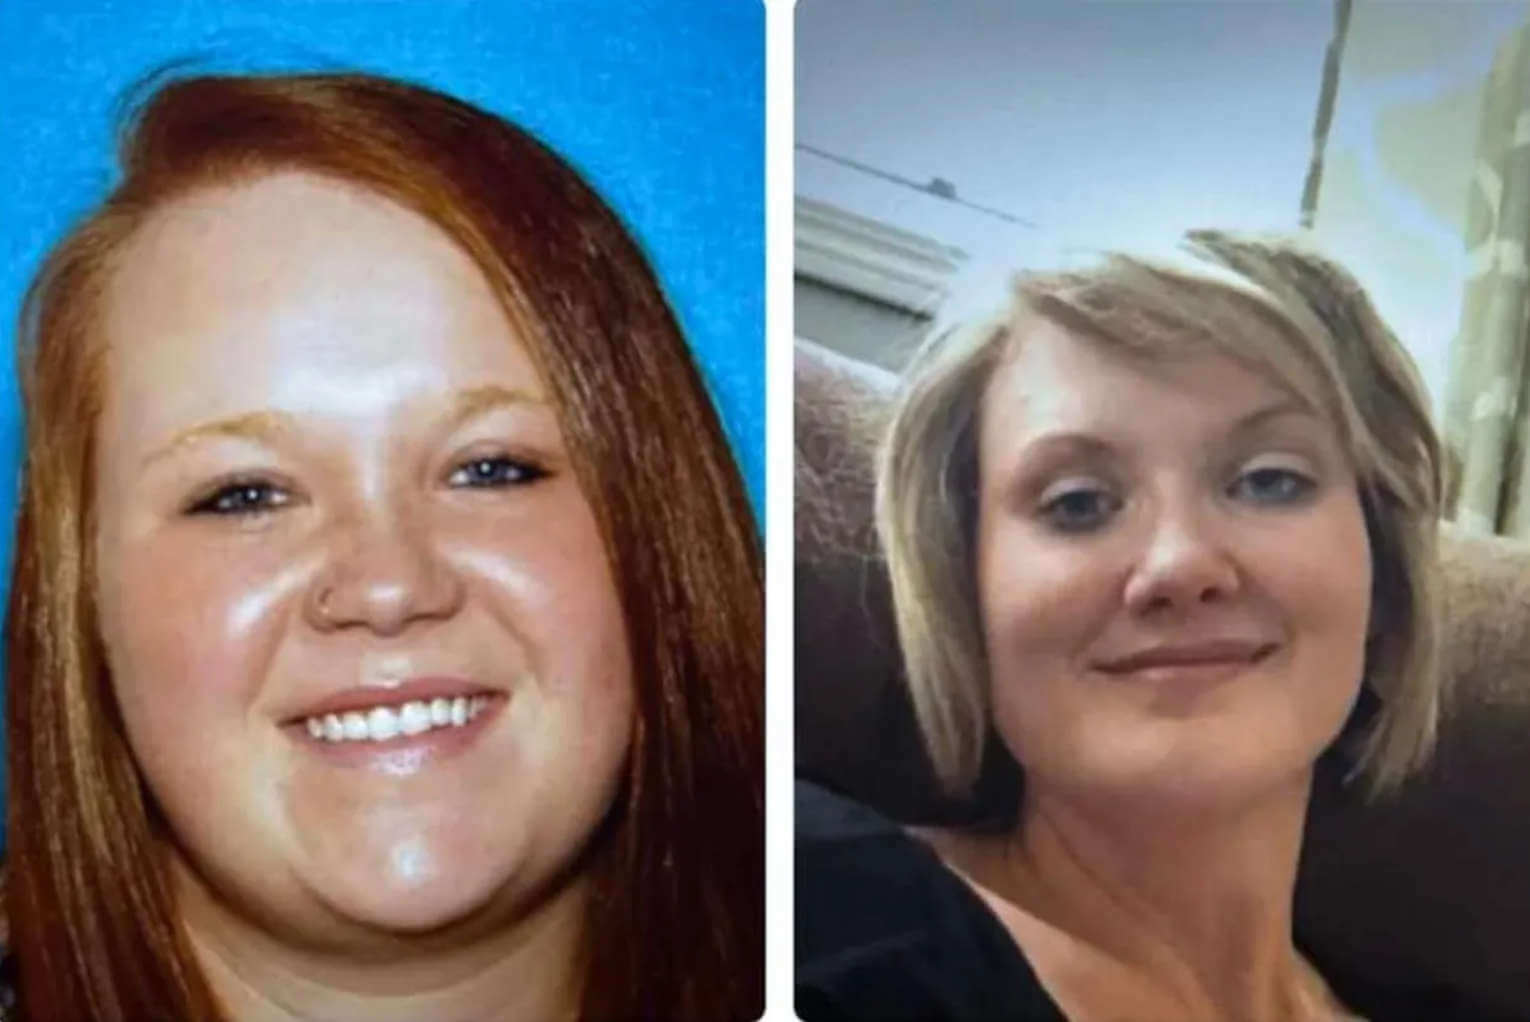 Pastor’s Wife, Her Friend Go Missing in ‘Suspicious Disappearance,’ Oklahoma Police Say